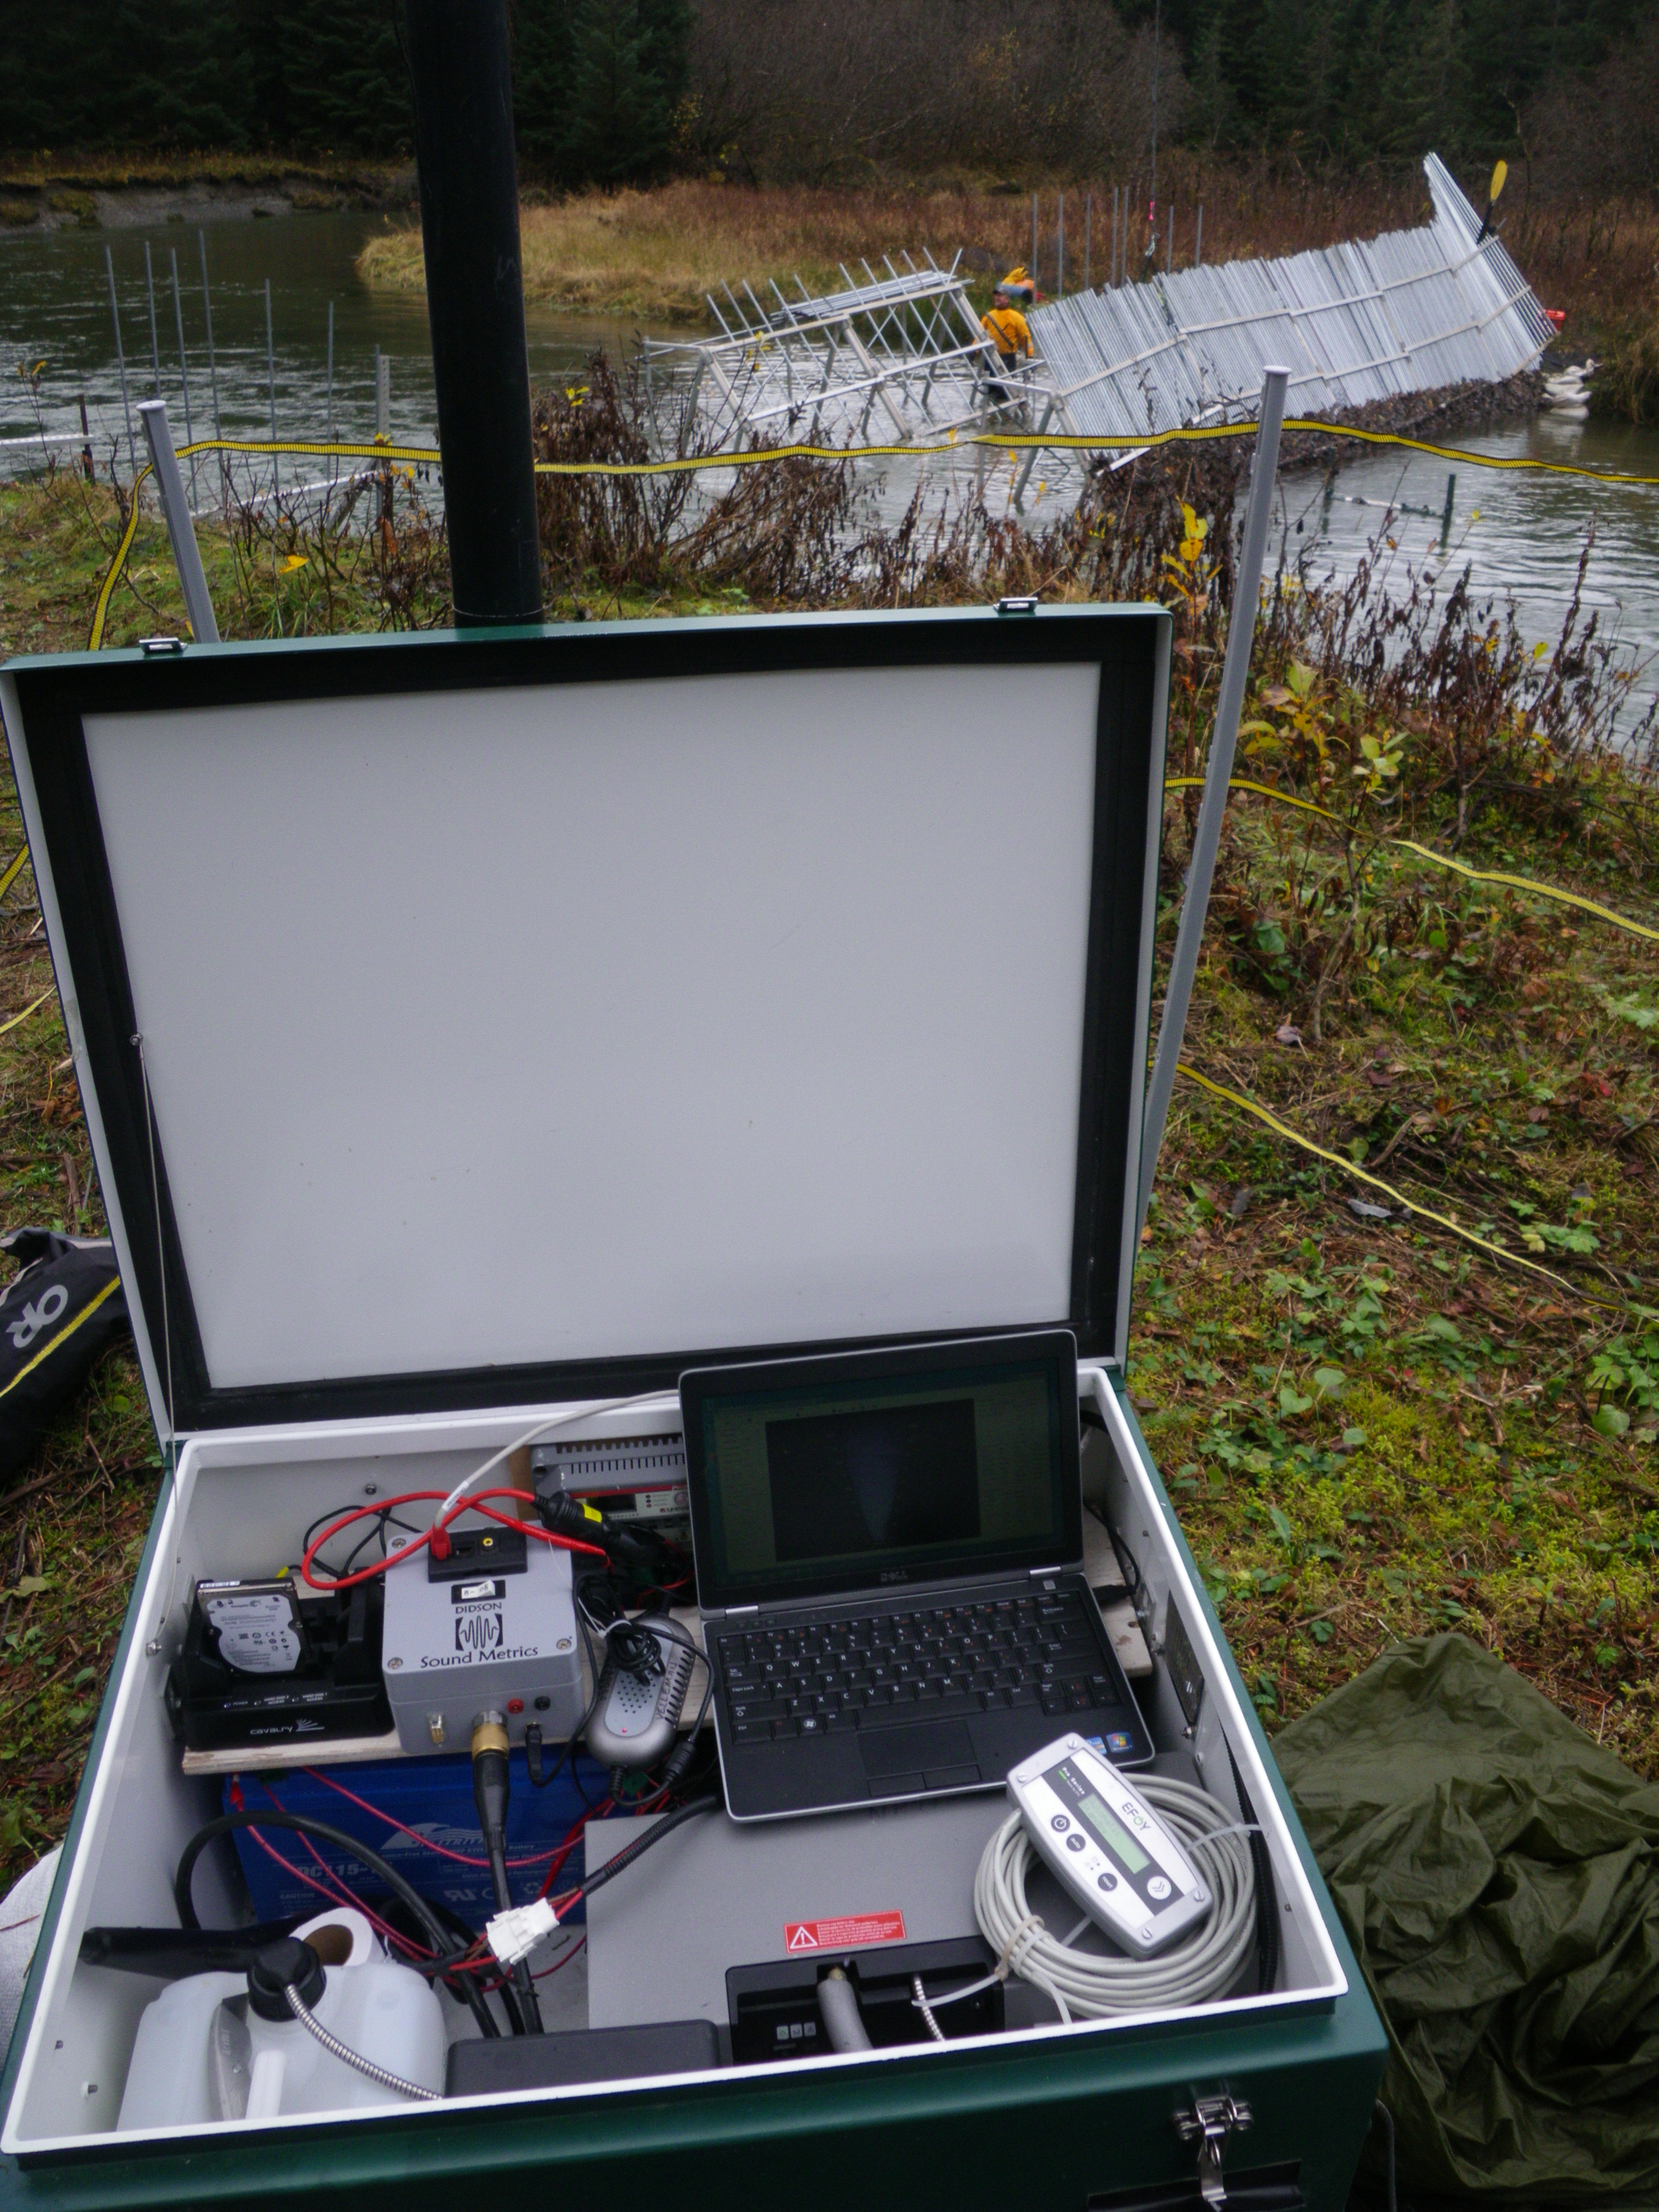 Sonar instrumentation with fish weir in the background